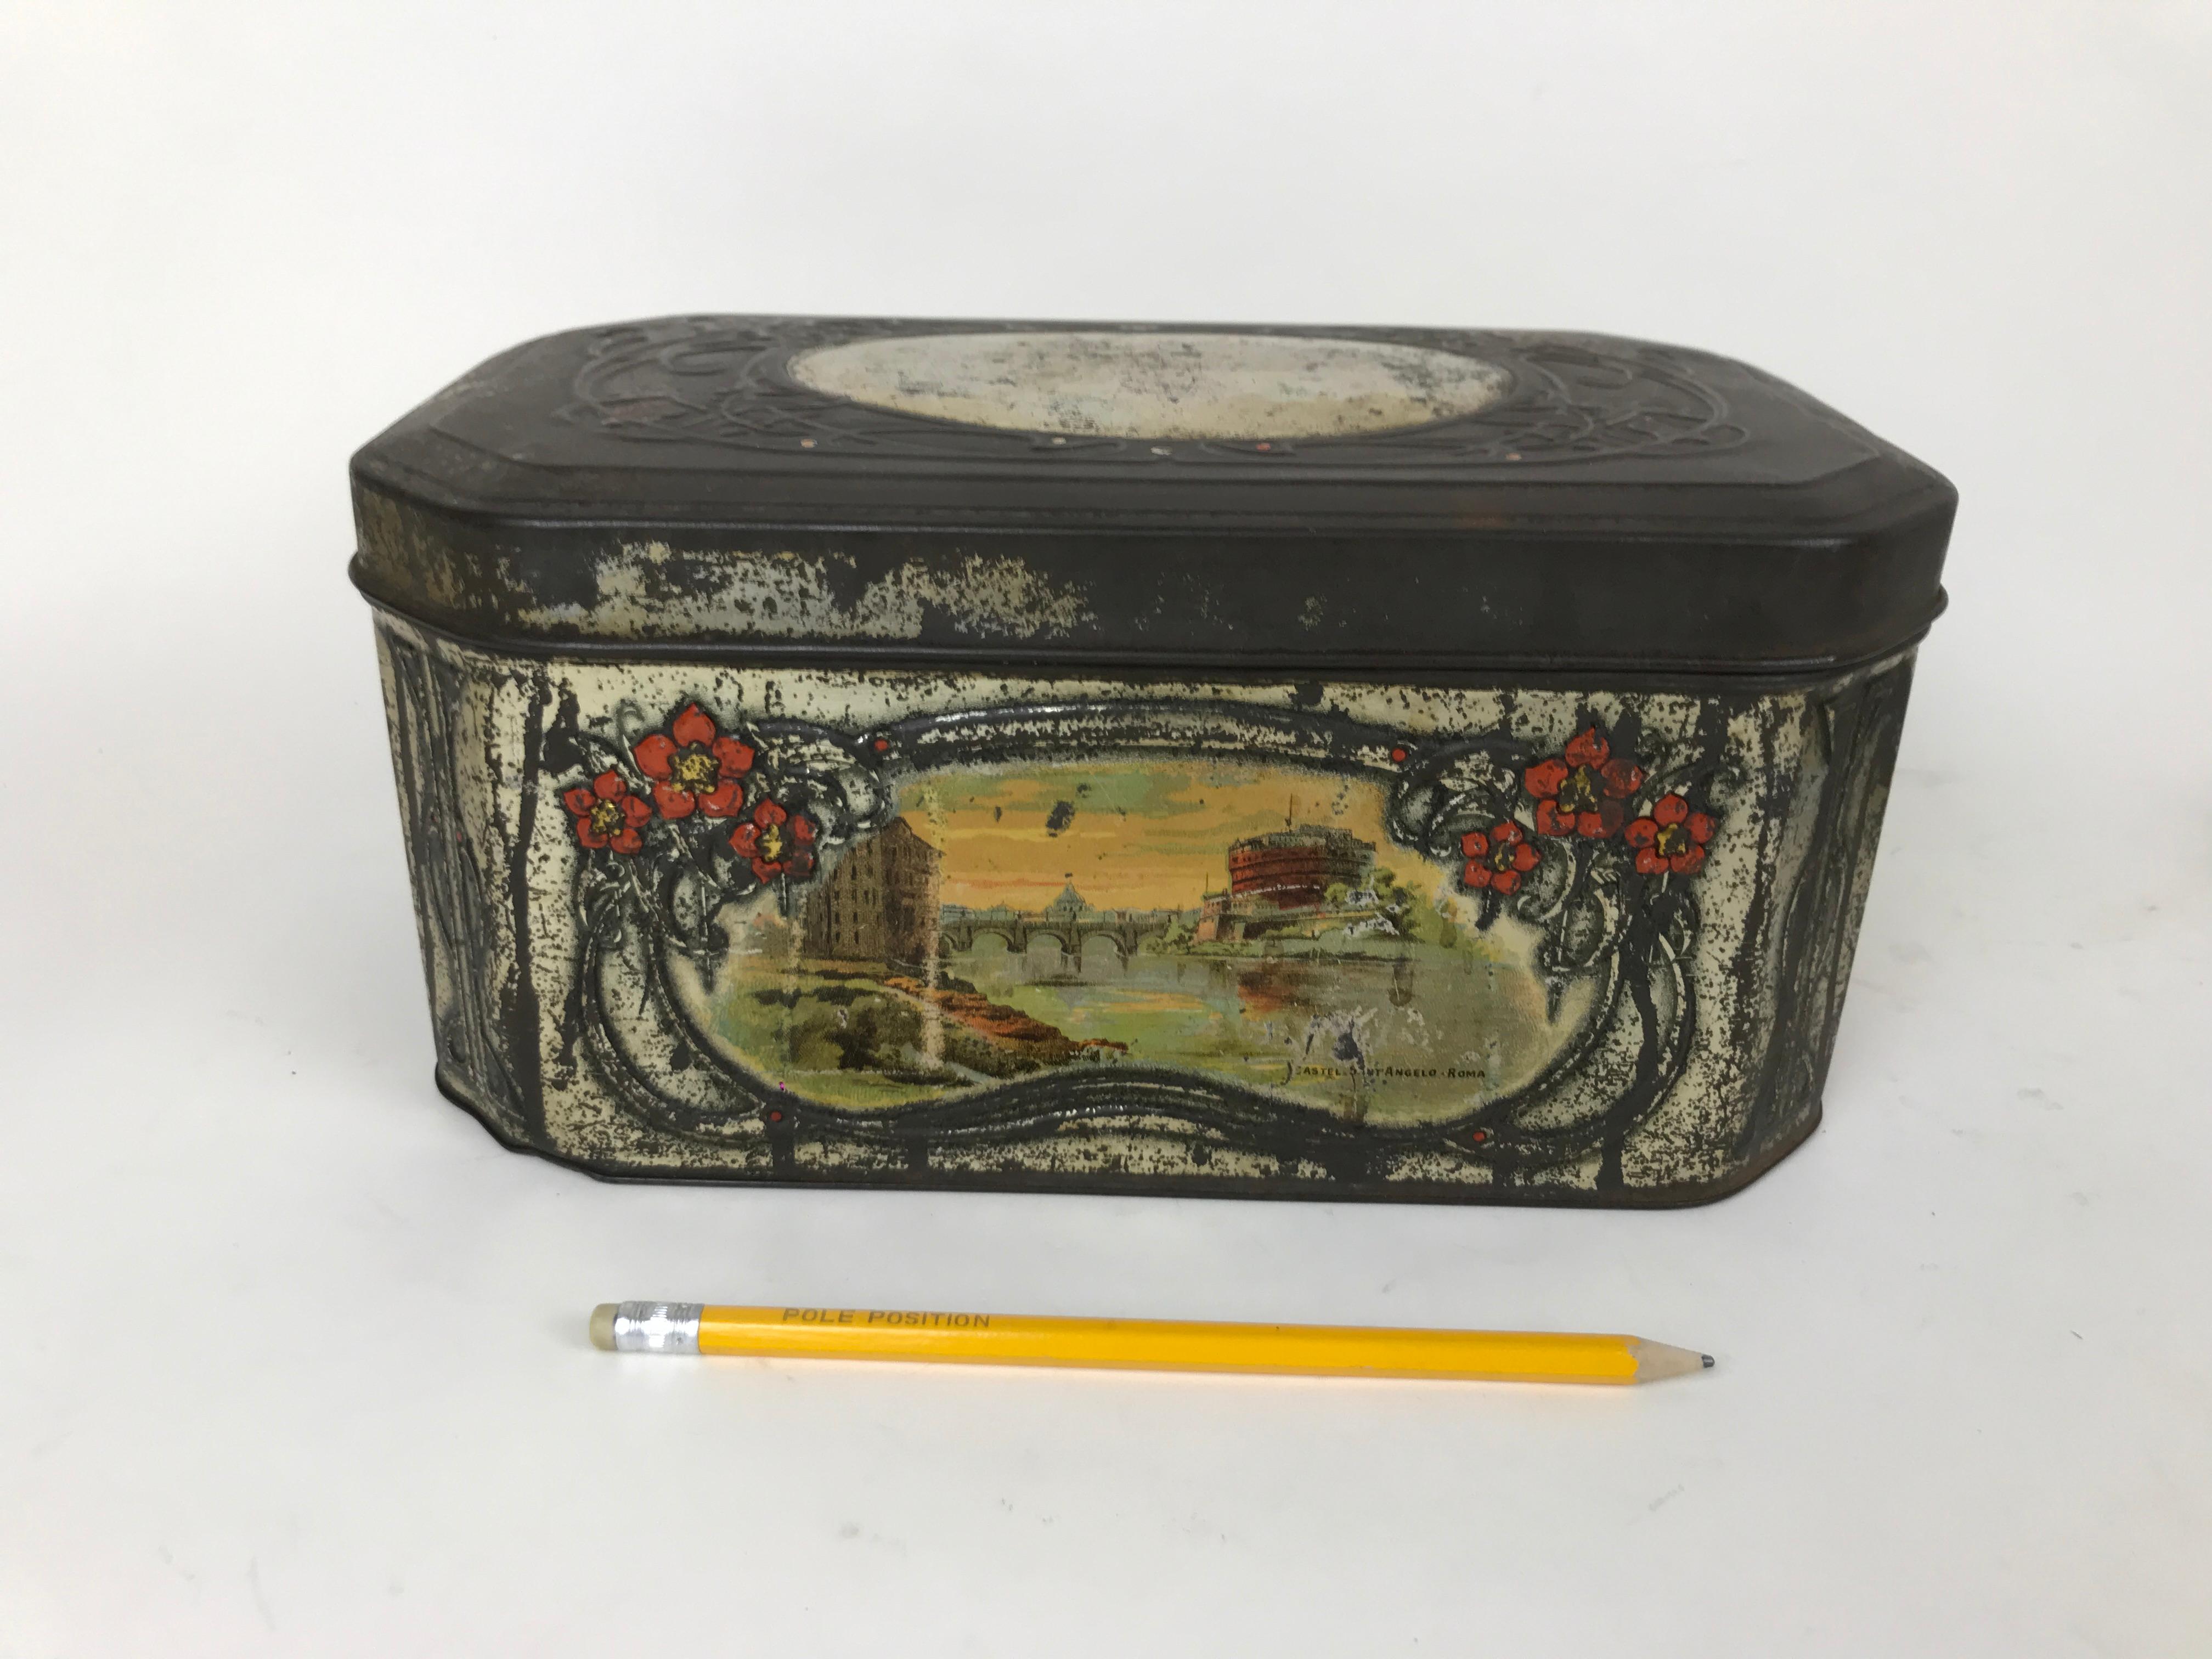 Very nice vintage screen printed tin box produced in Italy in early 1900.

All four sides of the box are decorated with multi Art Nouveau style colored panoramic views of Rome:
-front: the Capitol Square
-back: the Castel Sant'Angelo